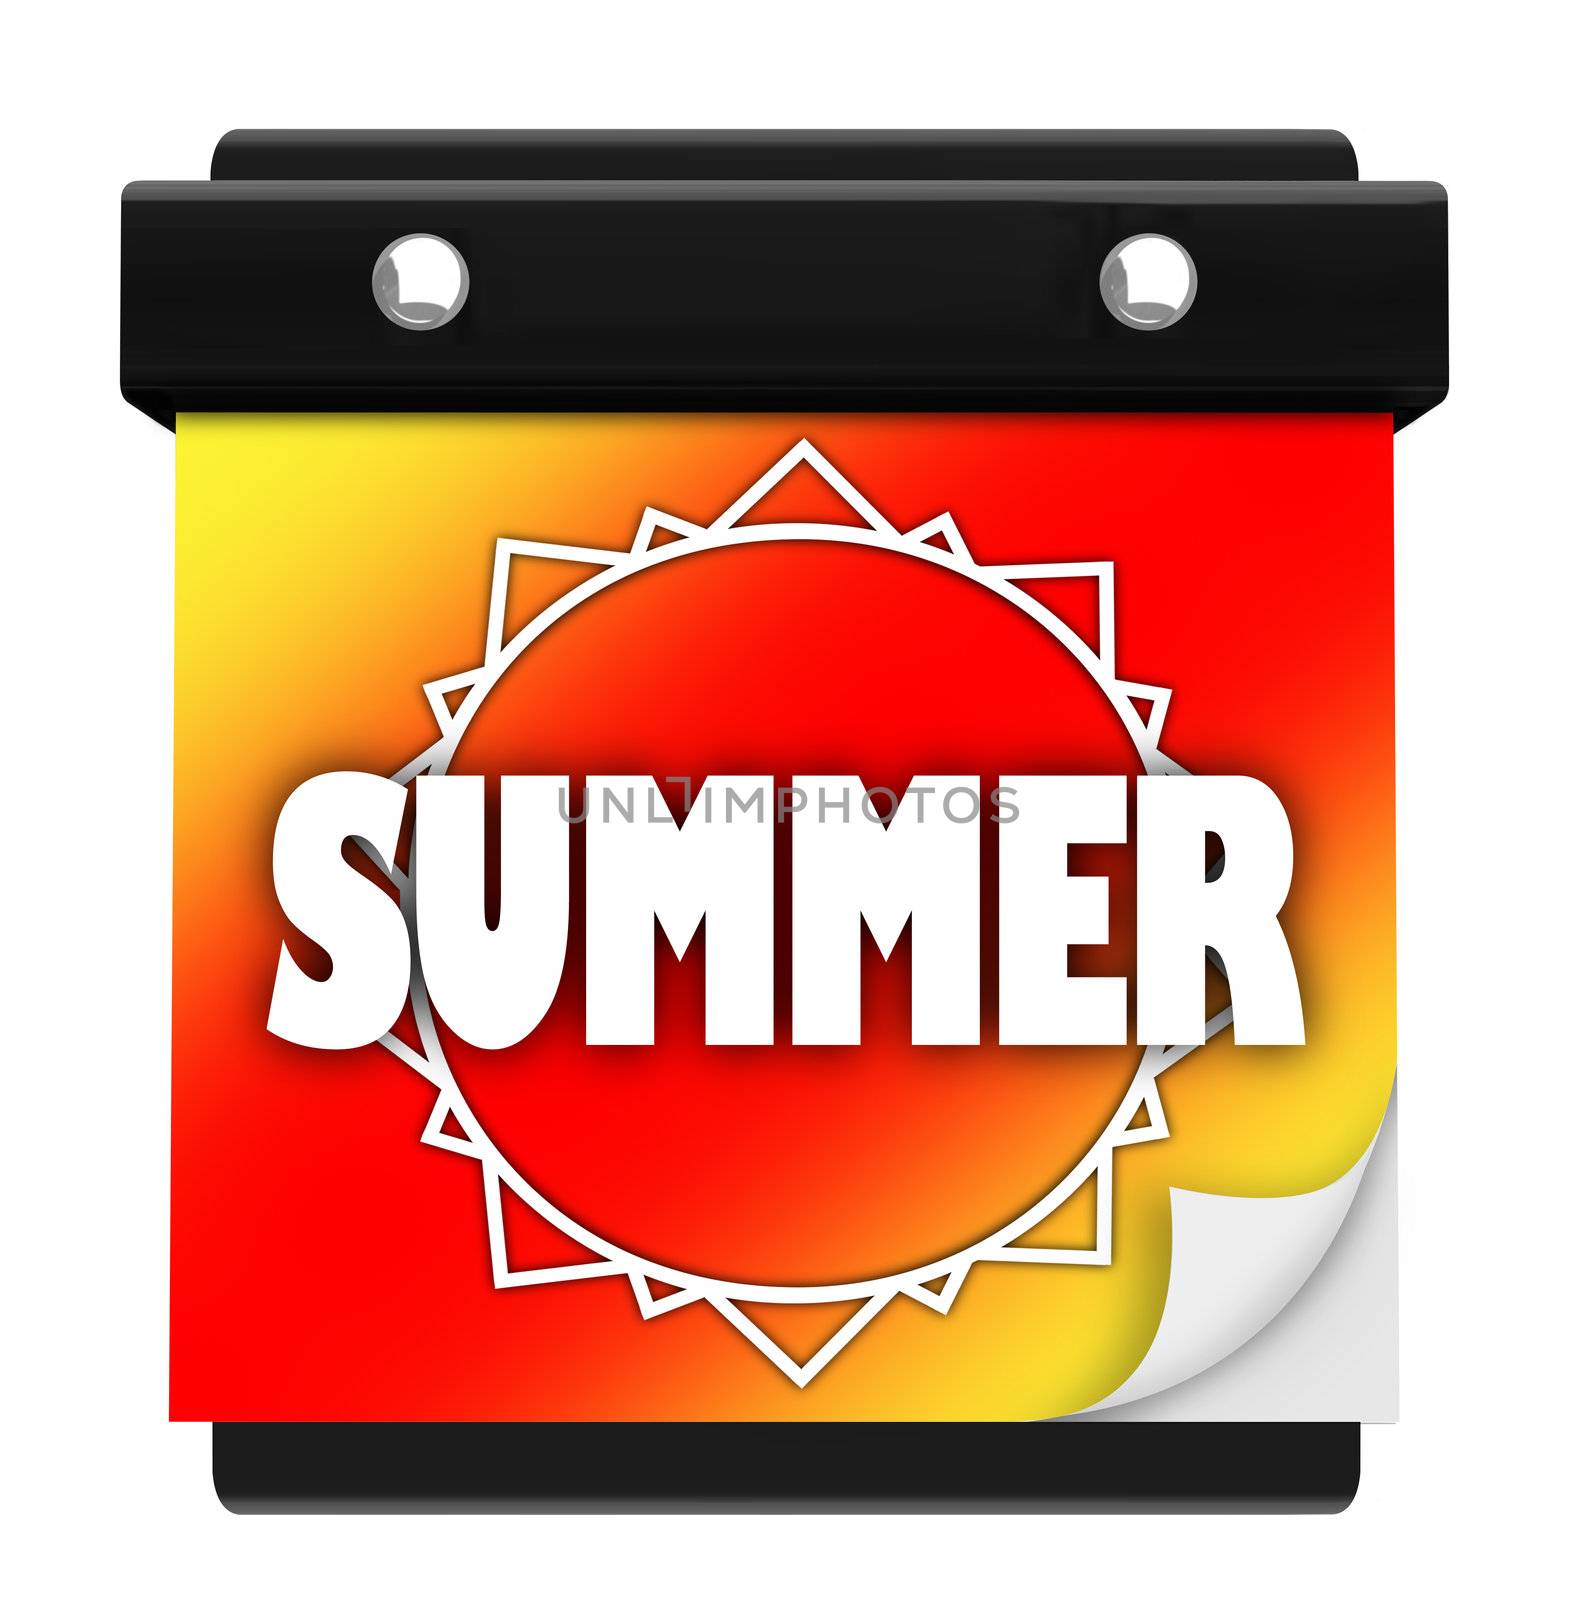 The word Summer on a colorful orange, red and yellow background with a sun on the tearawy page of a wall calendar with pages you turn to change the date or day, symbolizing the start of a hot new season